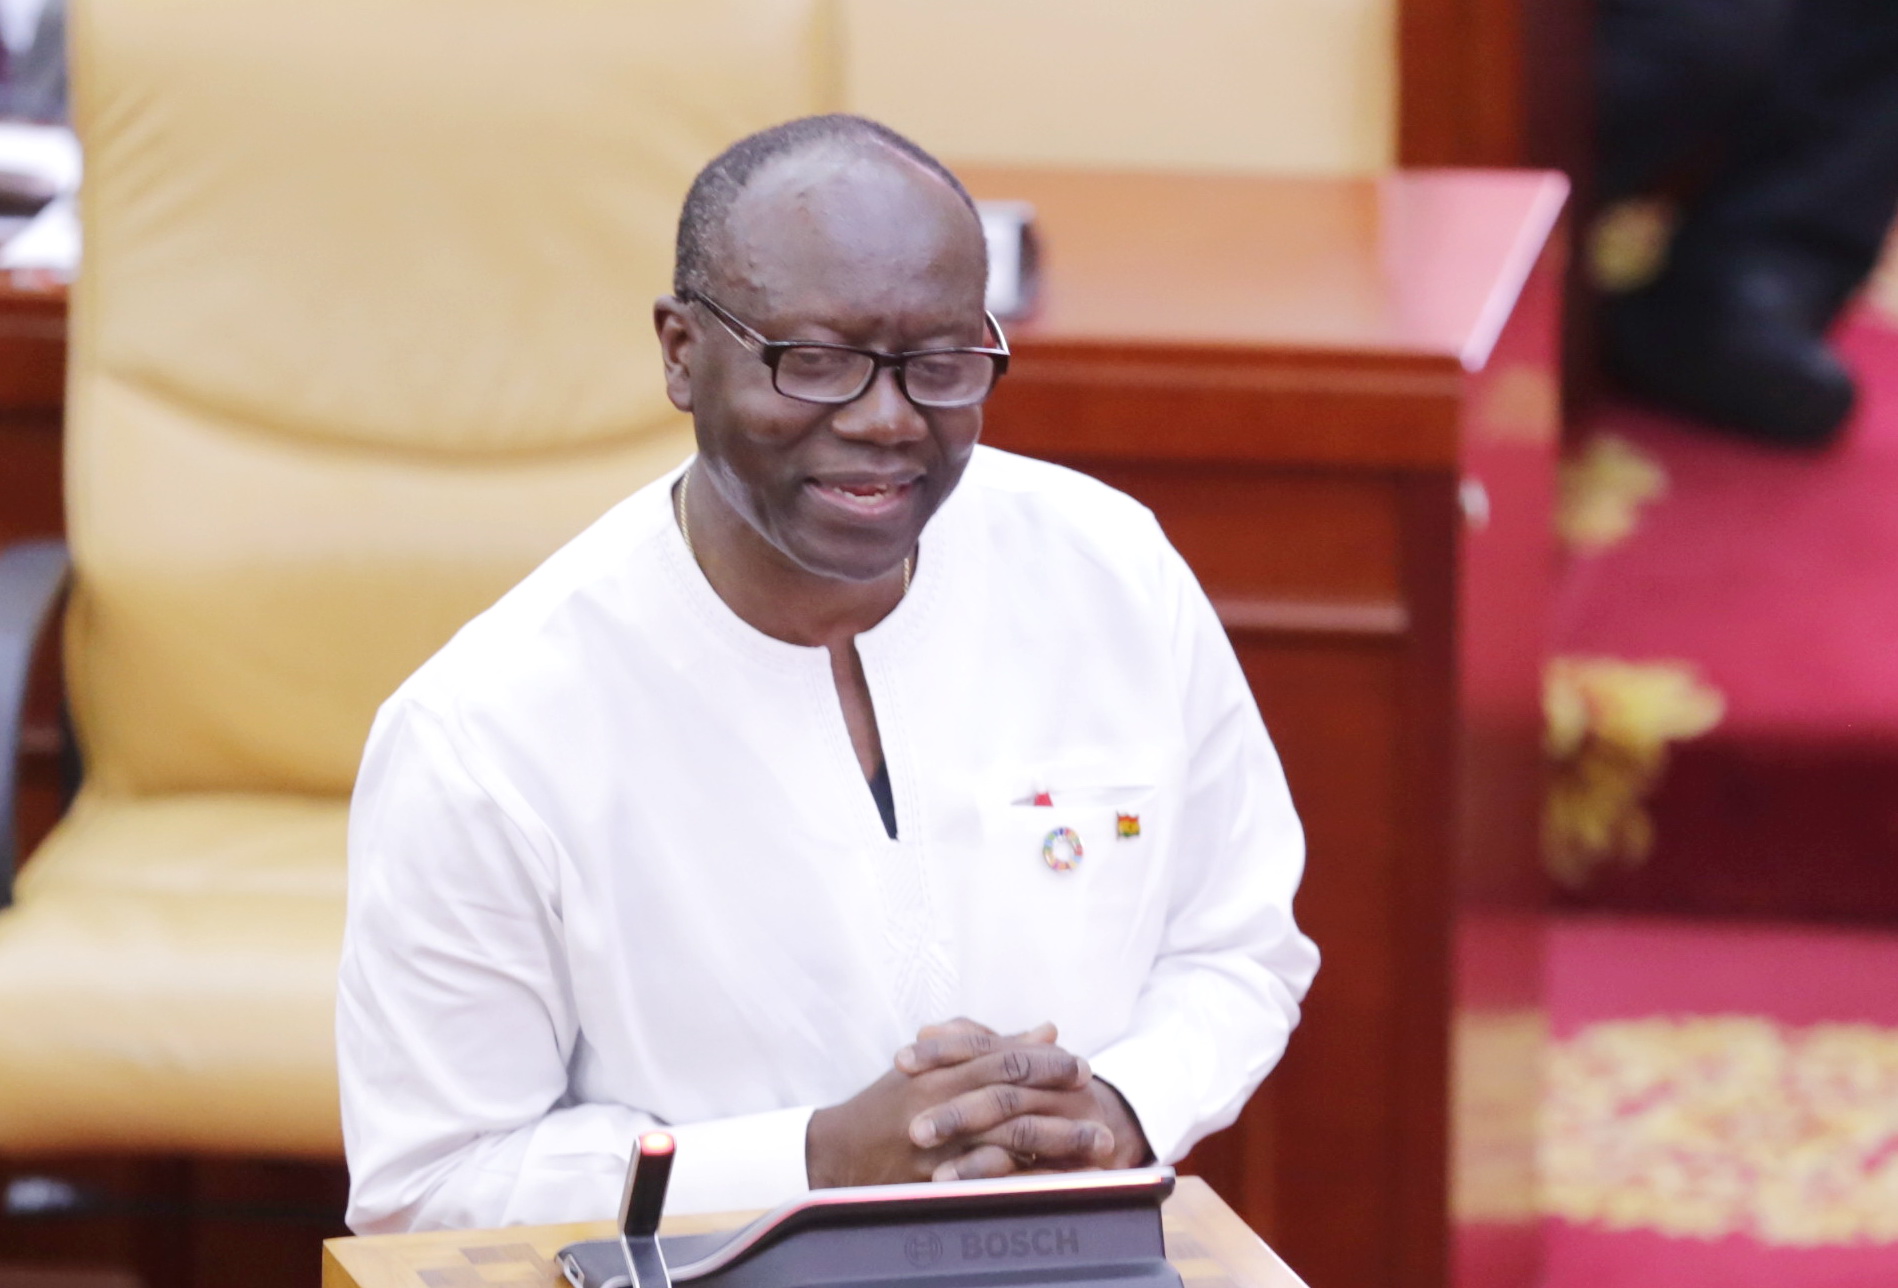 'Is there ever a good time for taxes'? Ofori Atta asks, in defense of new taxes